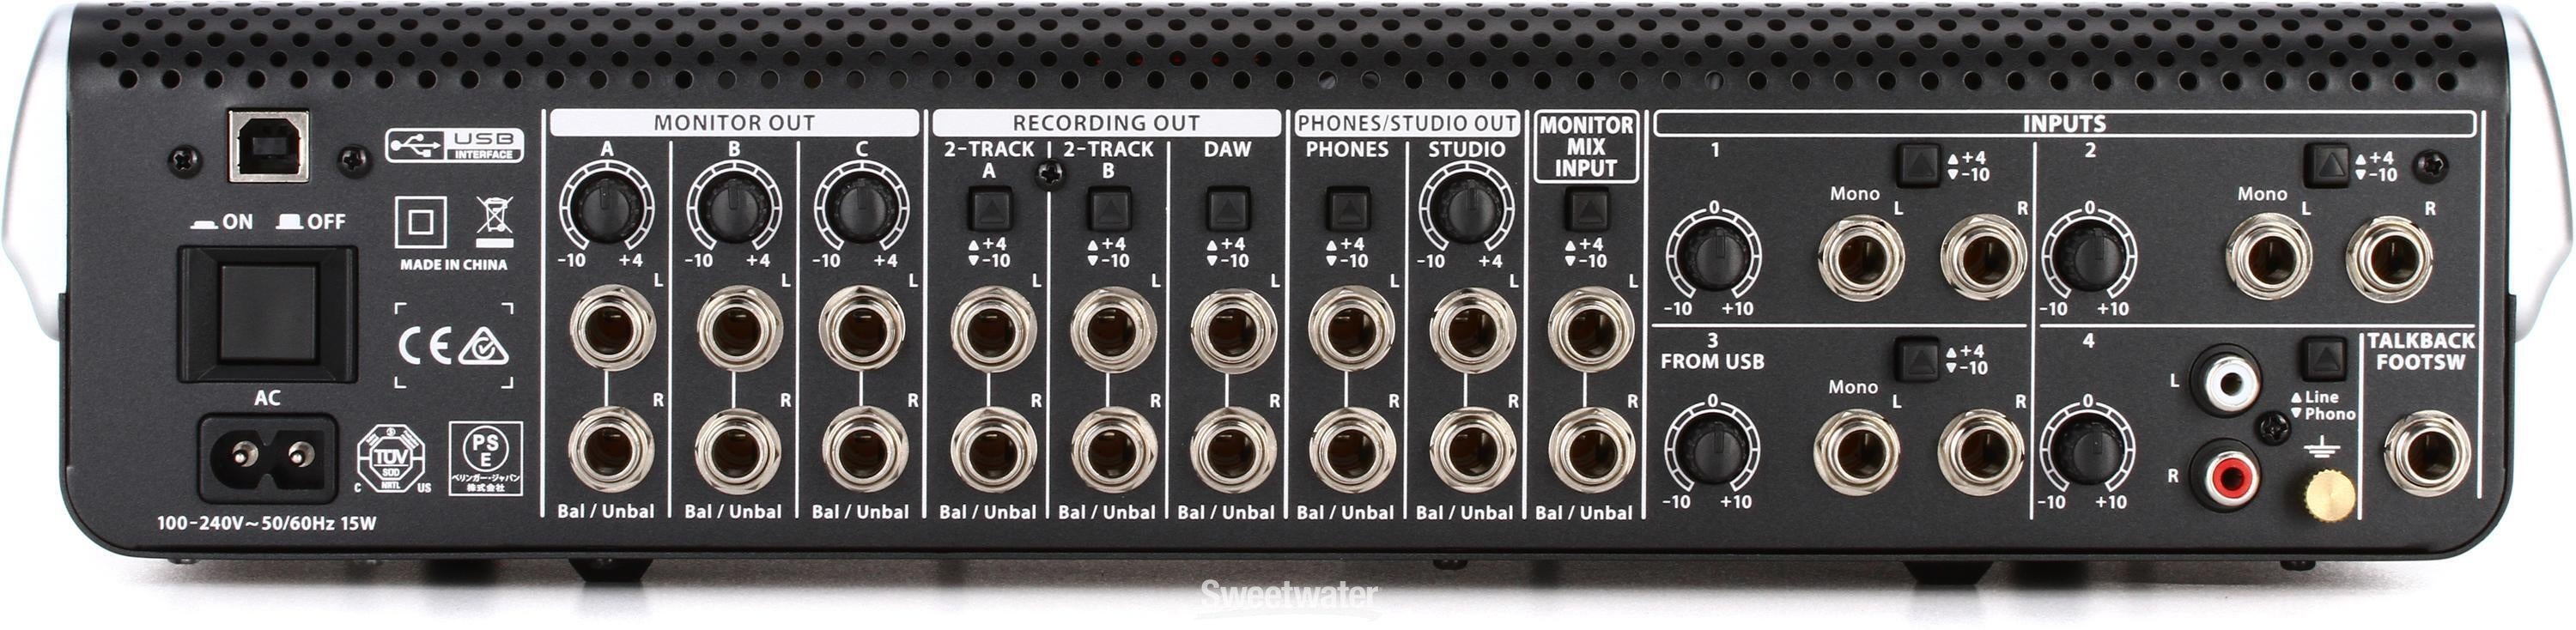 Behringer CONTROL2USB High-end Studio Control with VCA Control and 